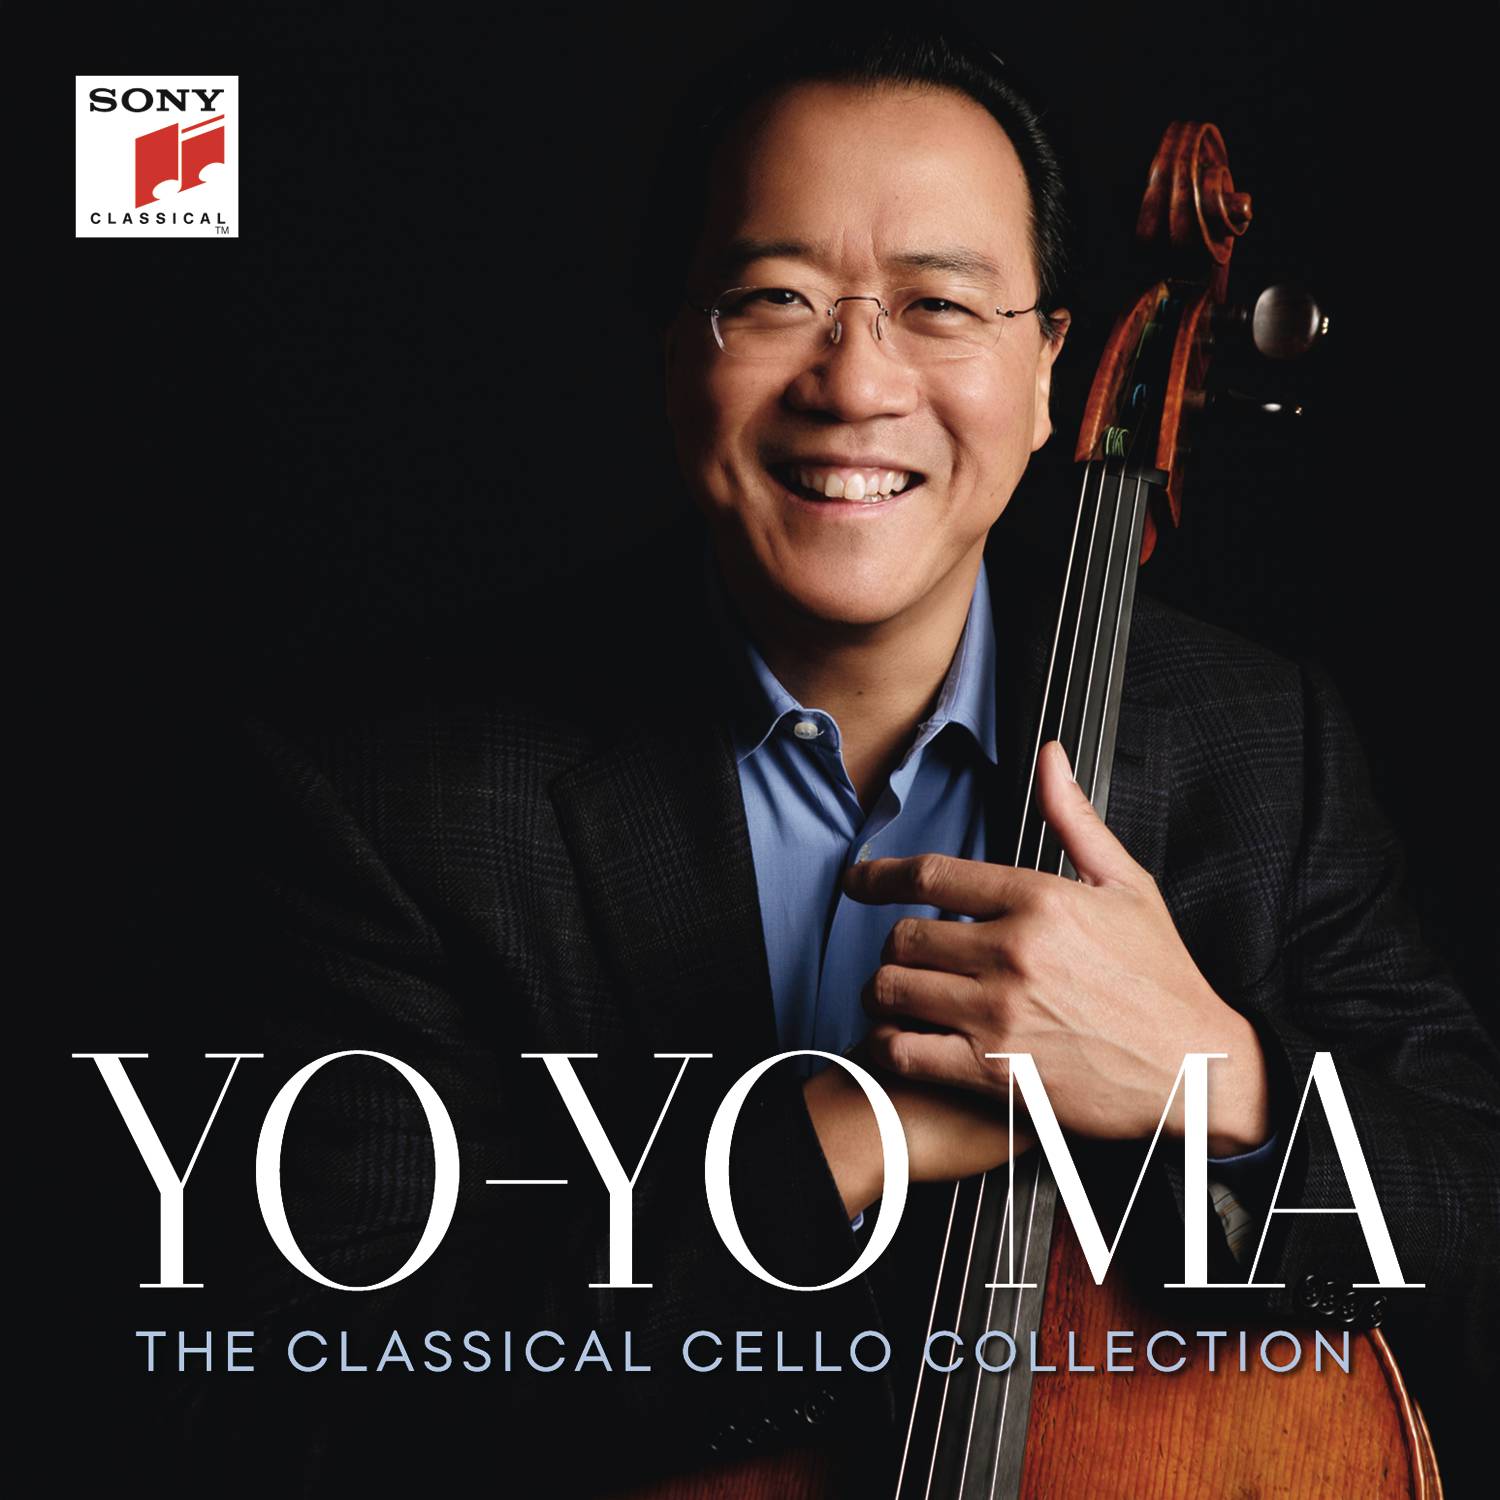 Symphony for Cello and Orchestra, Op. 68: I. Allegro maestoso